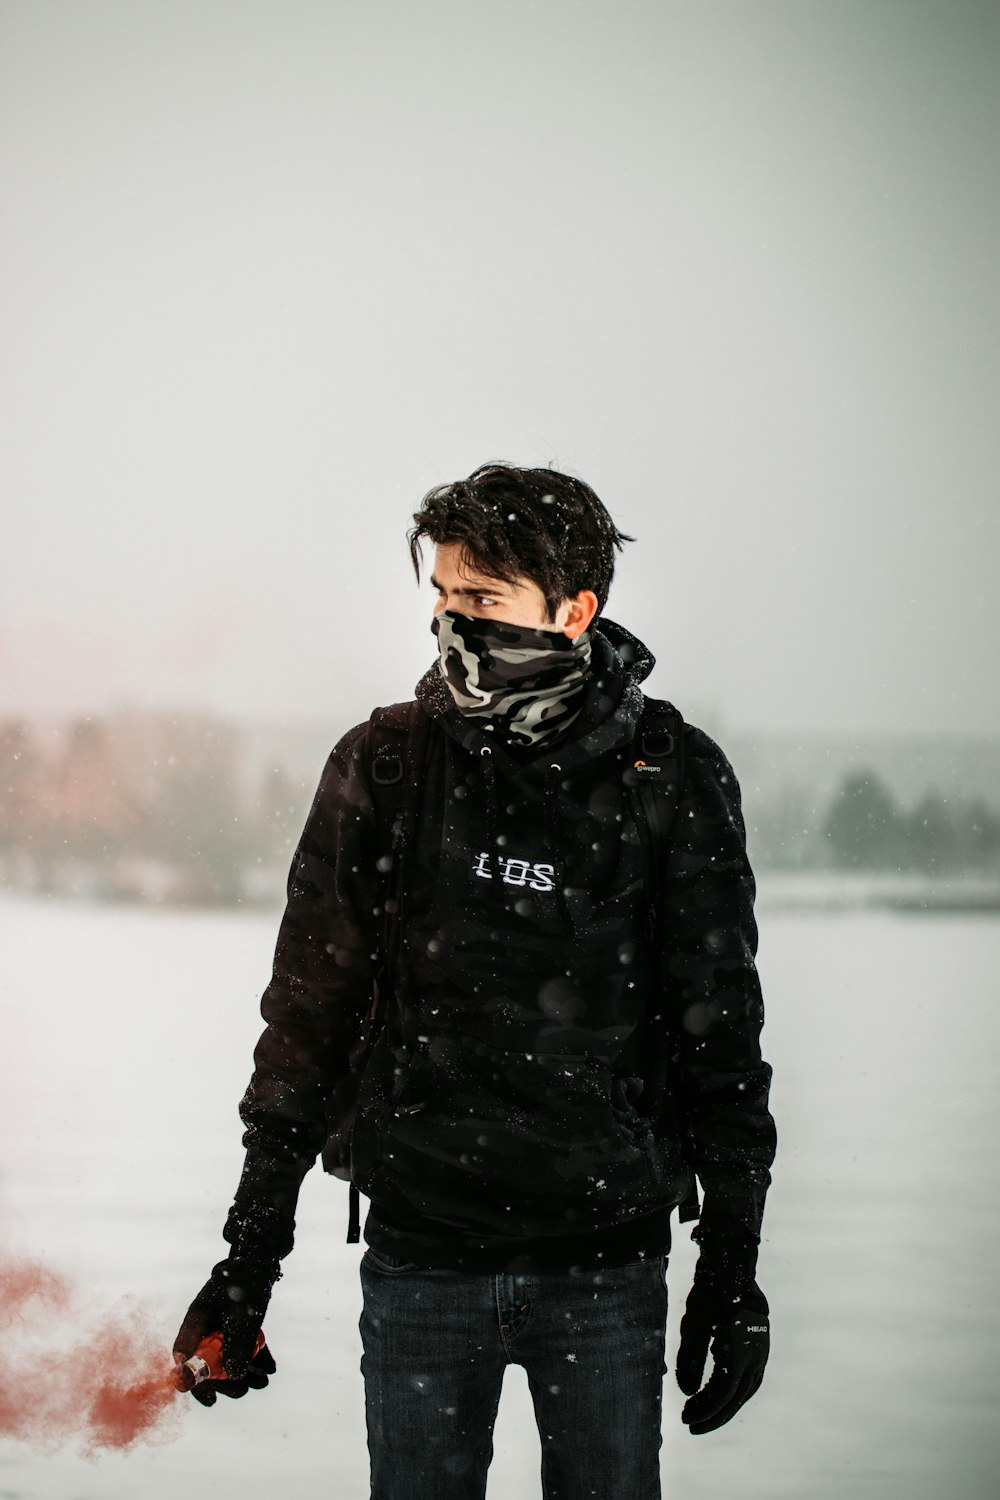 man in black jacket and black backpack standing on snow covered ground